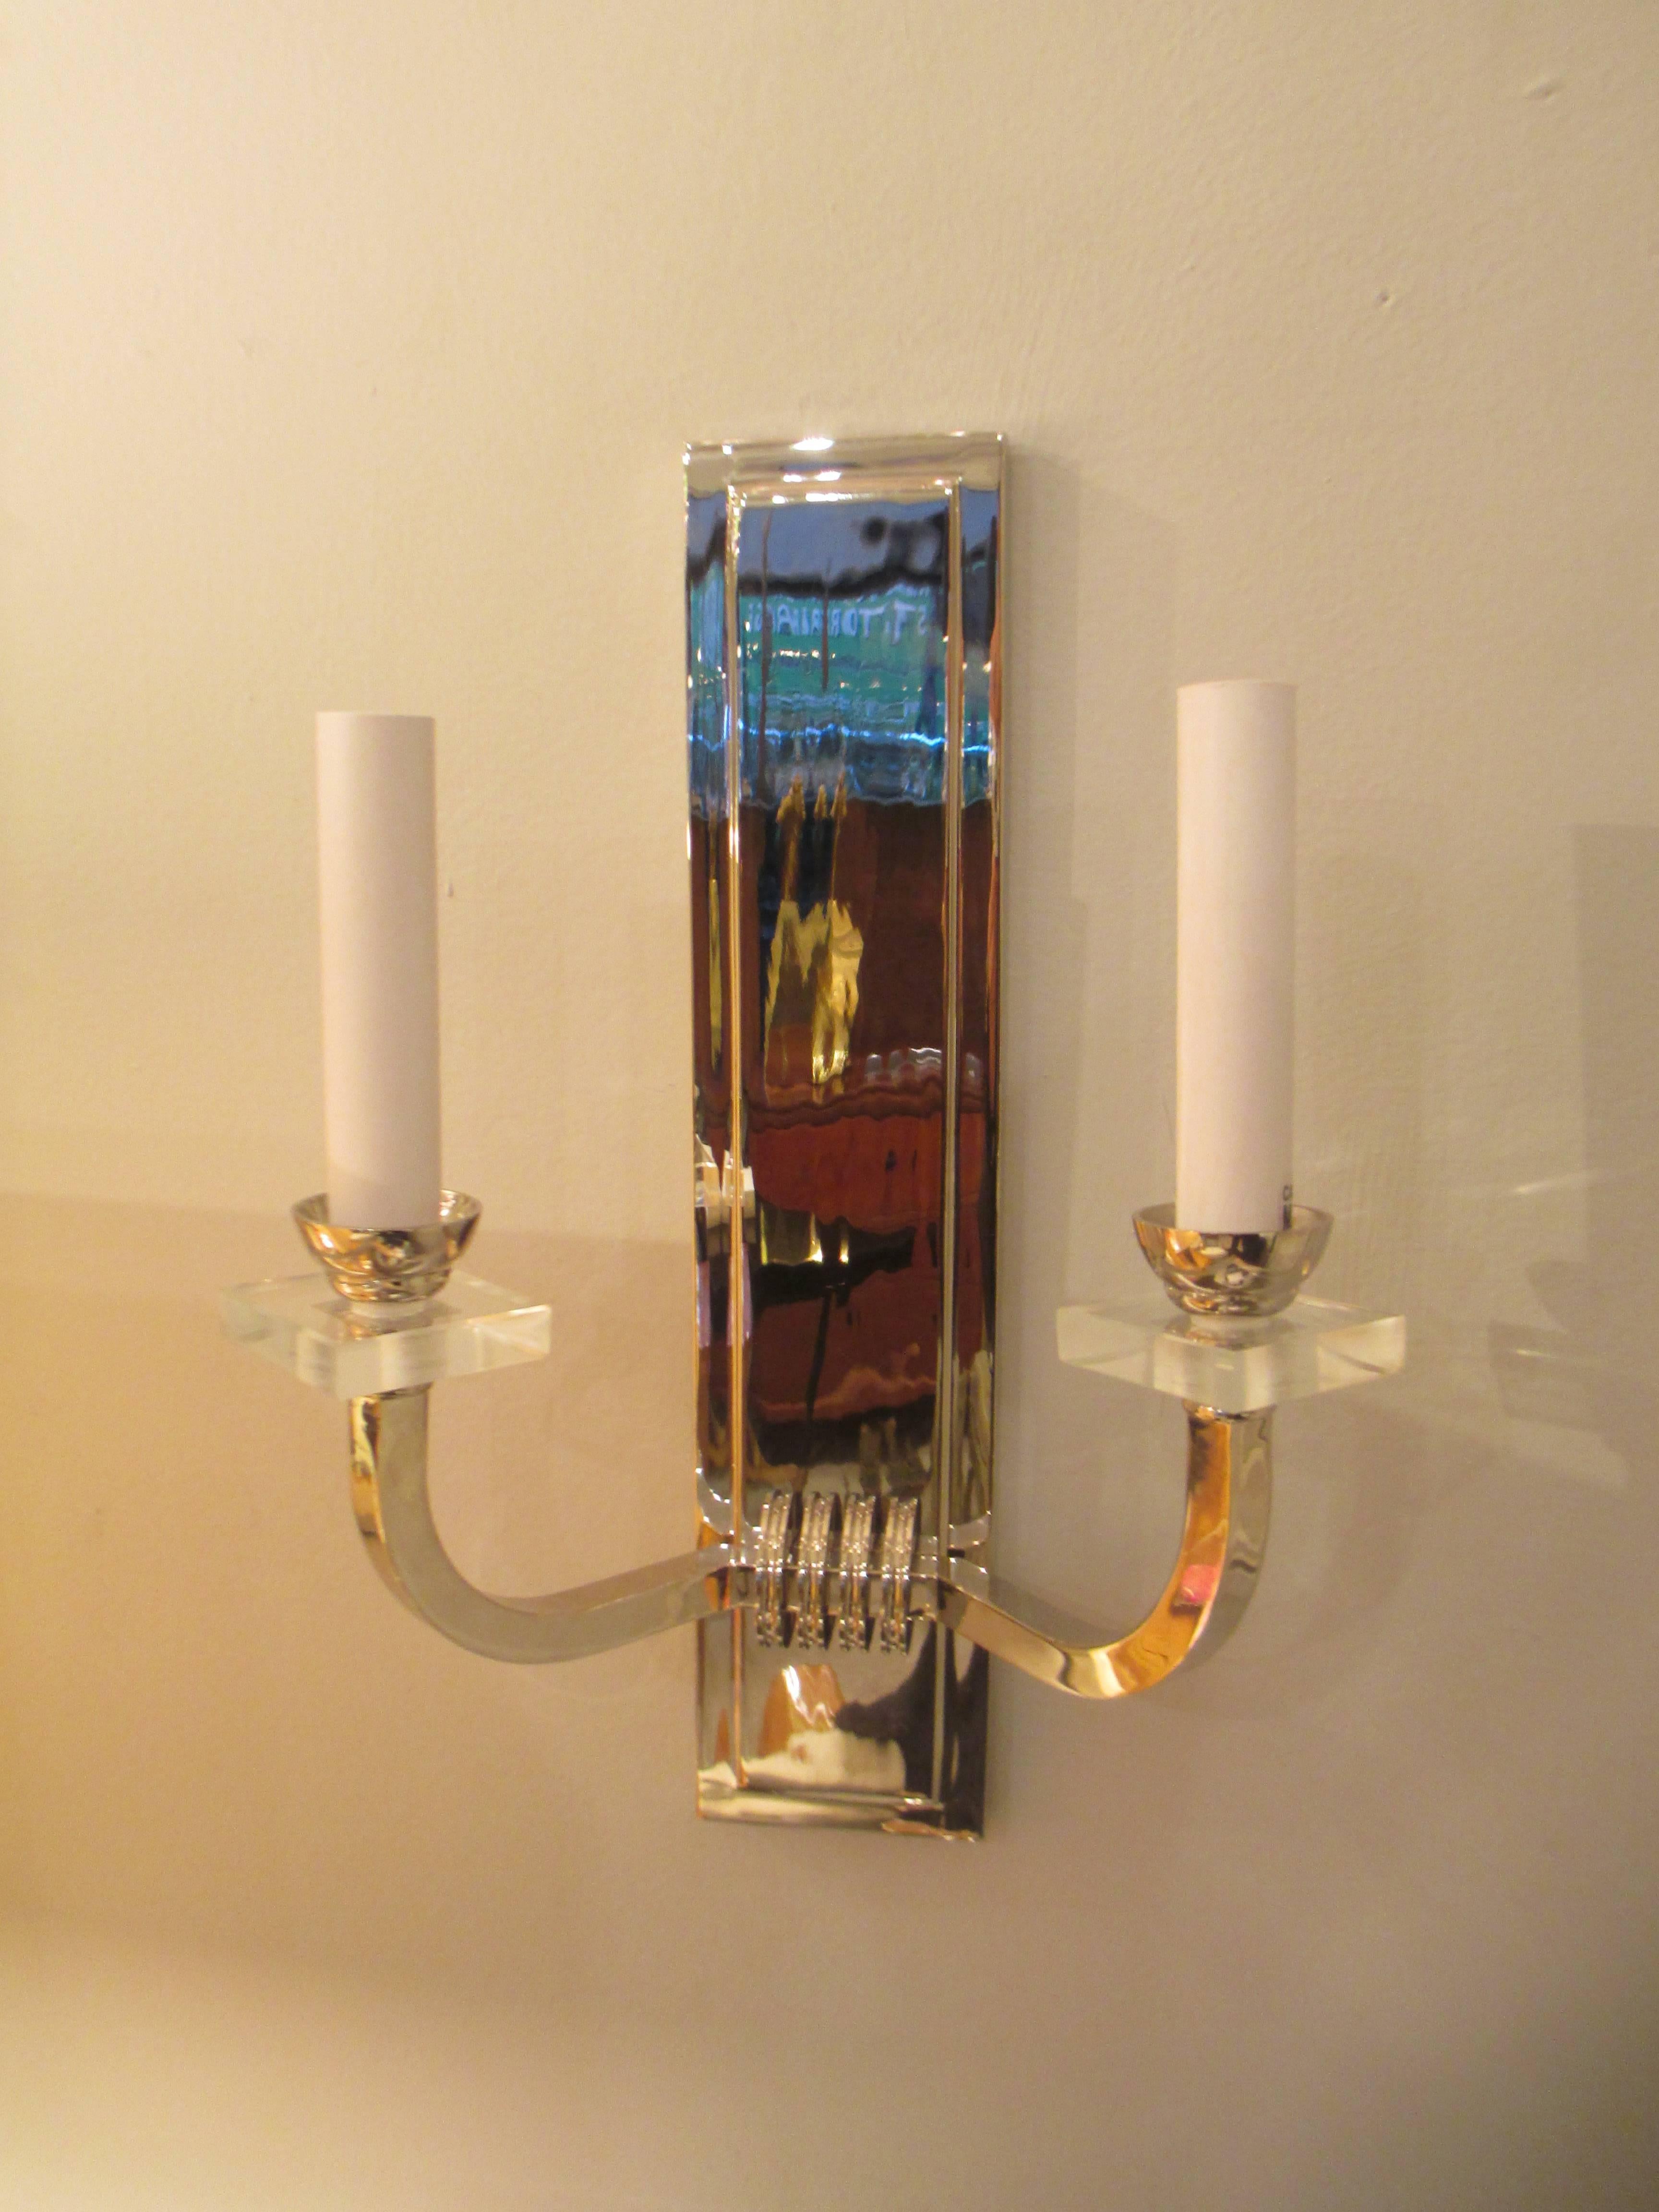 A custom pair of nickel-plated two arms sconces.
Lead time for custom made is 8-10 weeks.